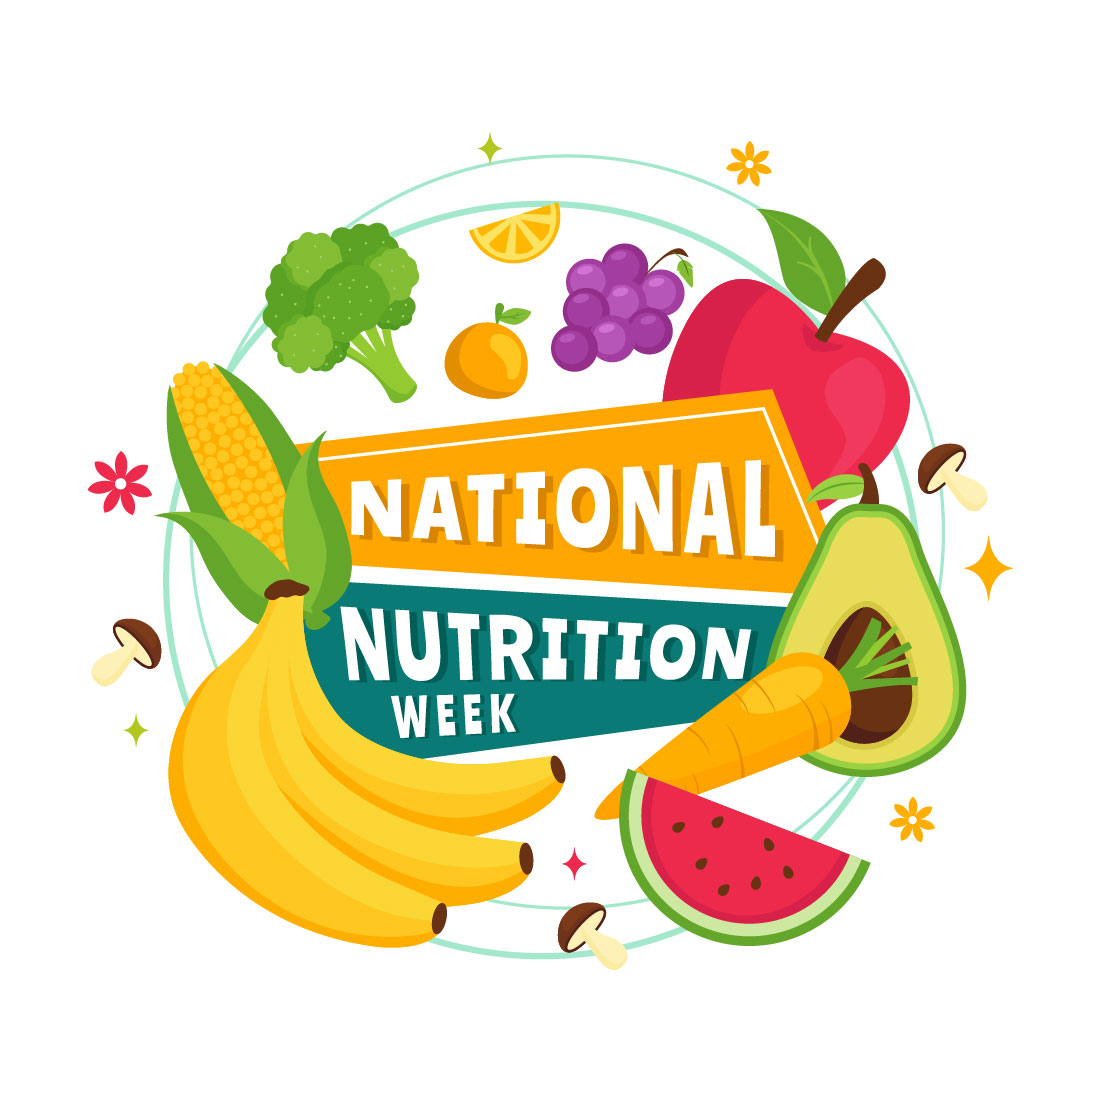 9 National Nutrition Week Day Illustration cover image.